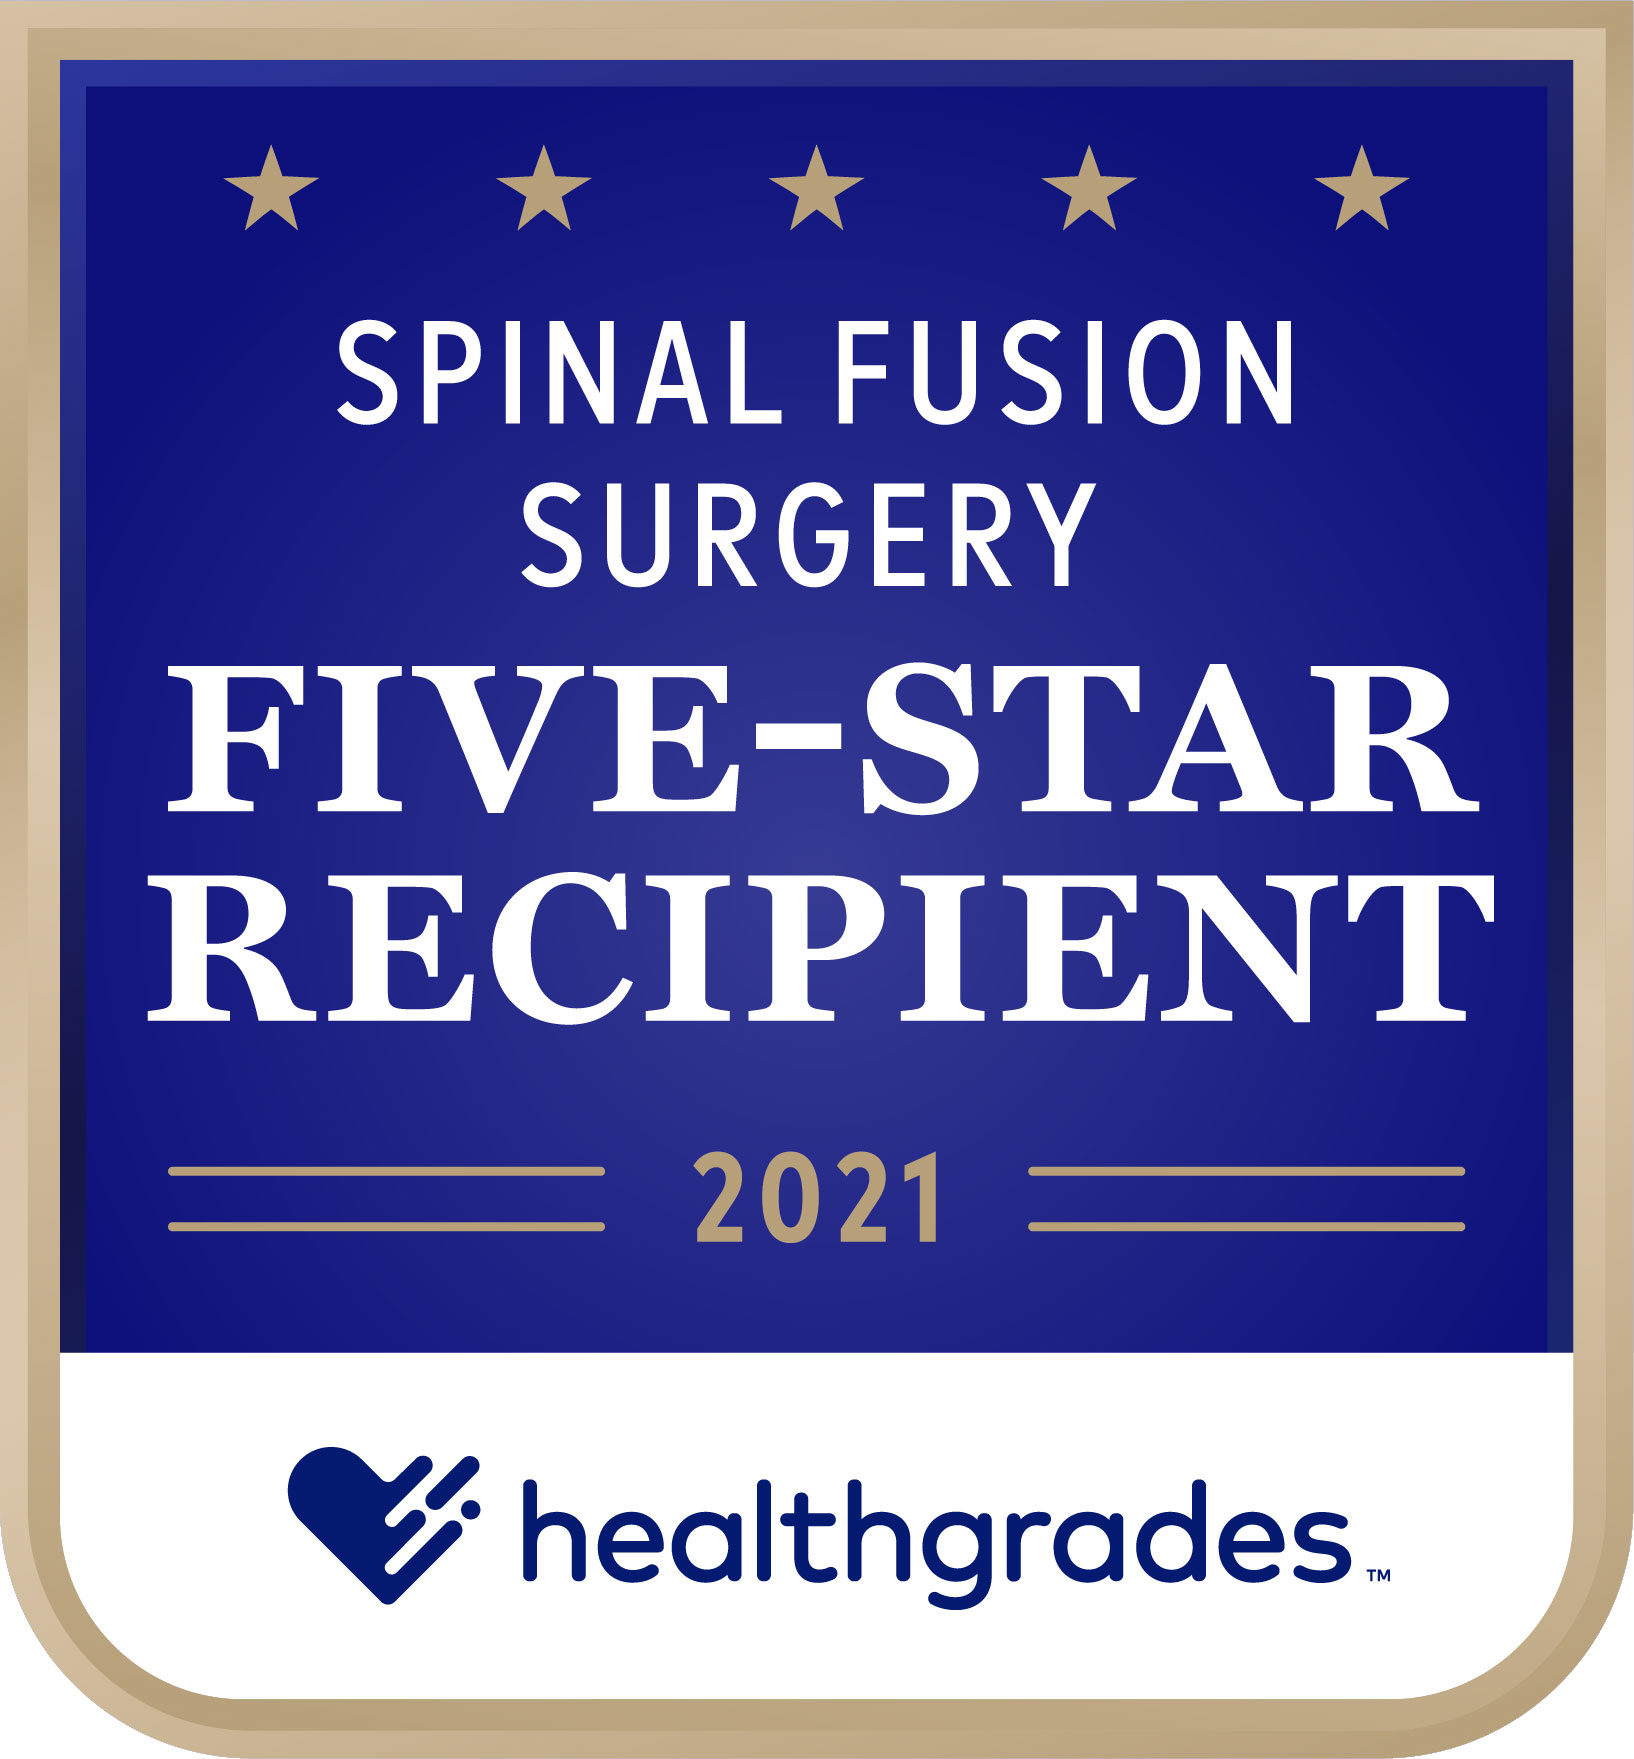 Five-Star_Spinal_Fusion_Surgery_2021